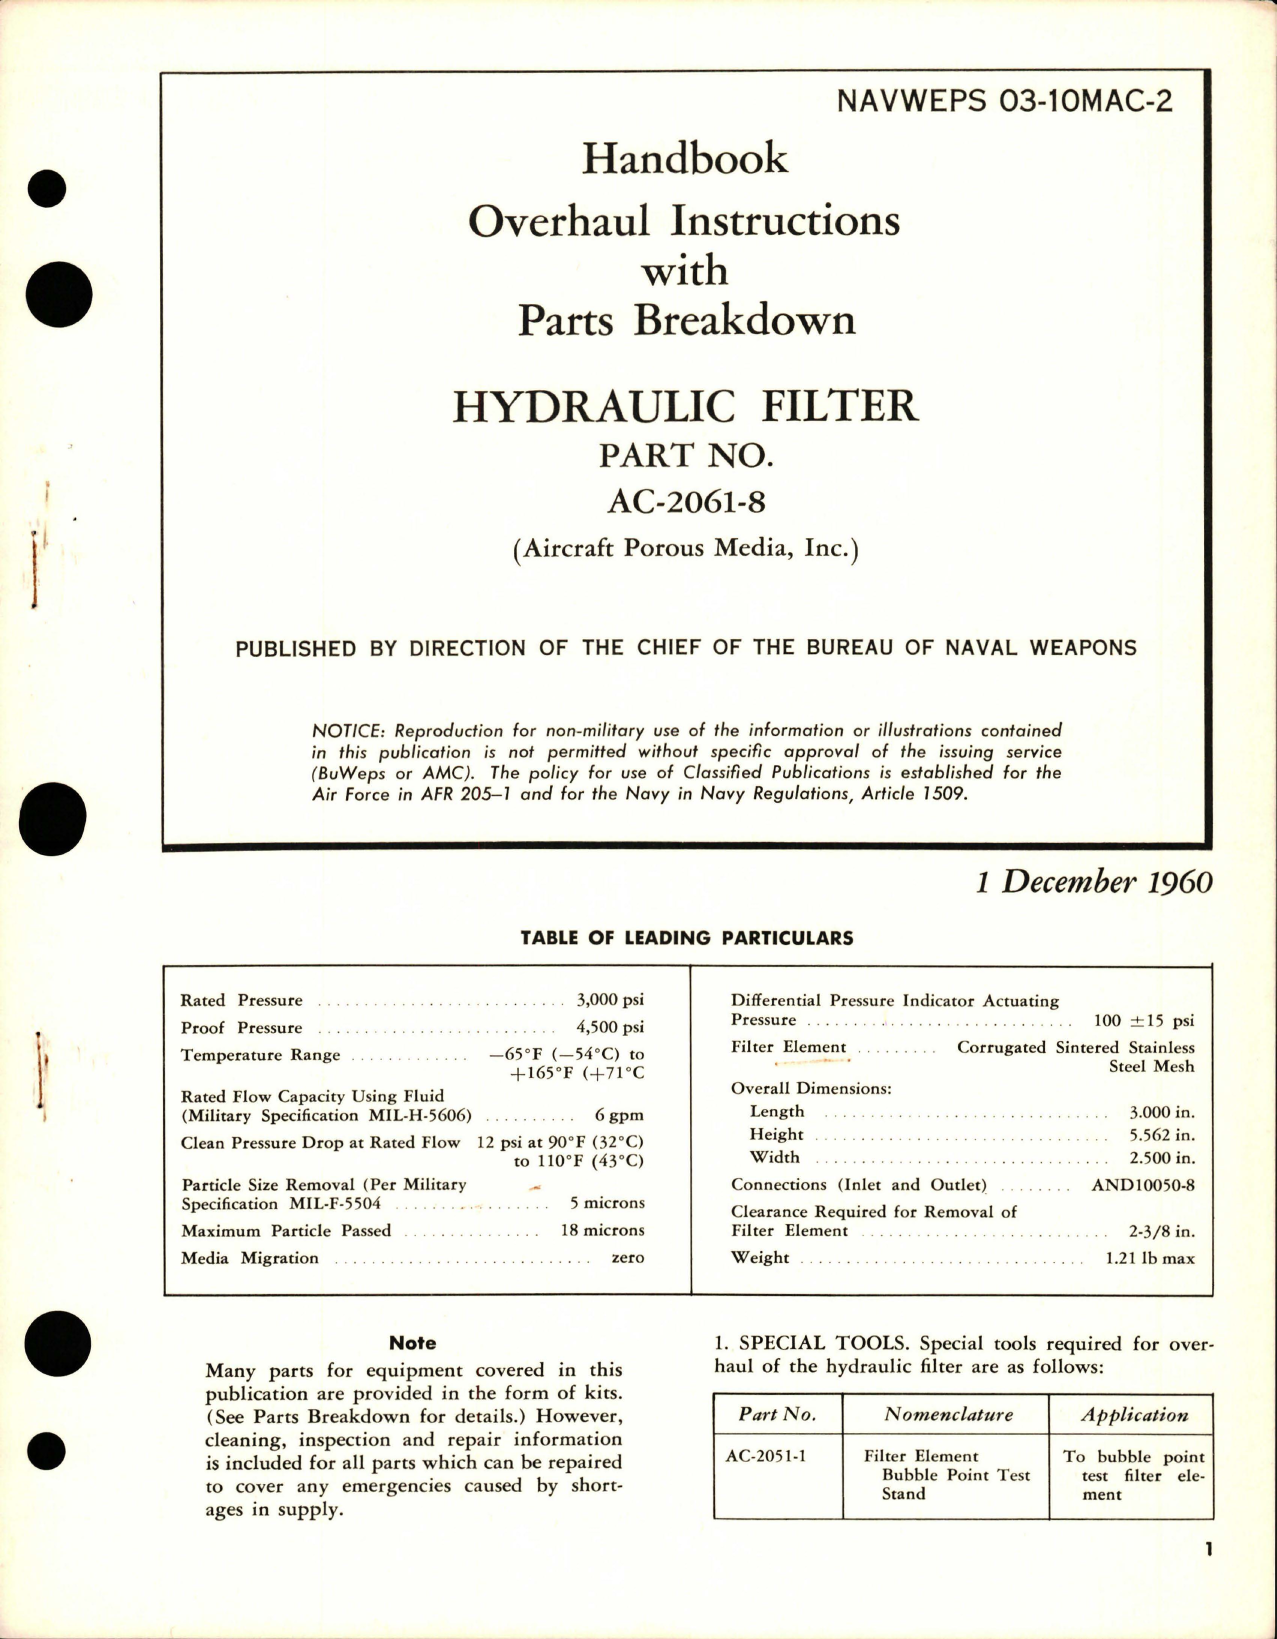 Sample page 1 from AirCorps Library document: Overhaul Instructions with Parts Breakdown for Hydraulic Filter - Part AC-2061-8